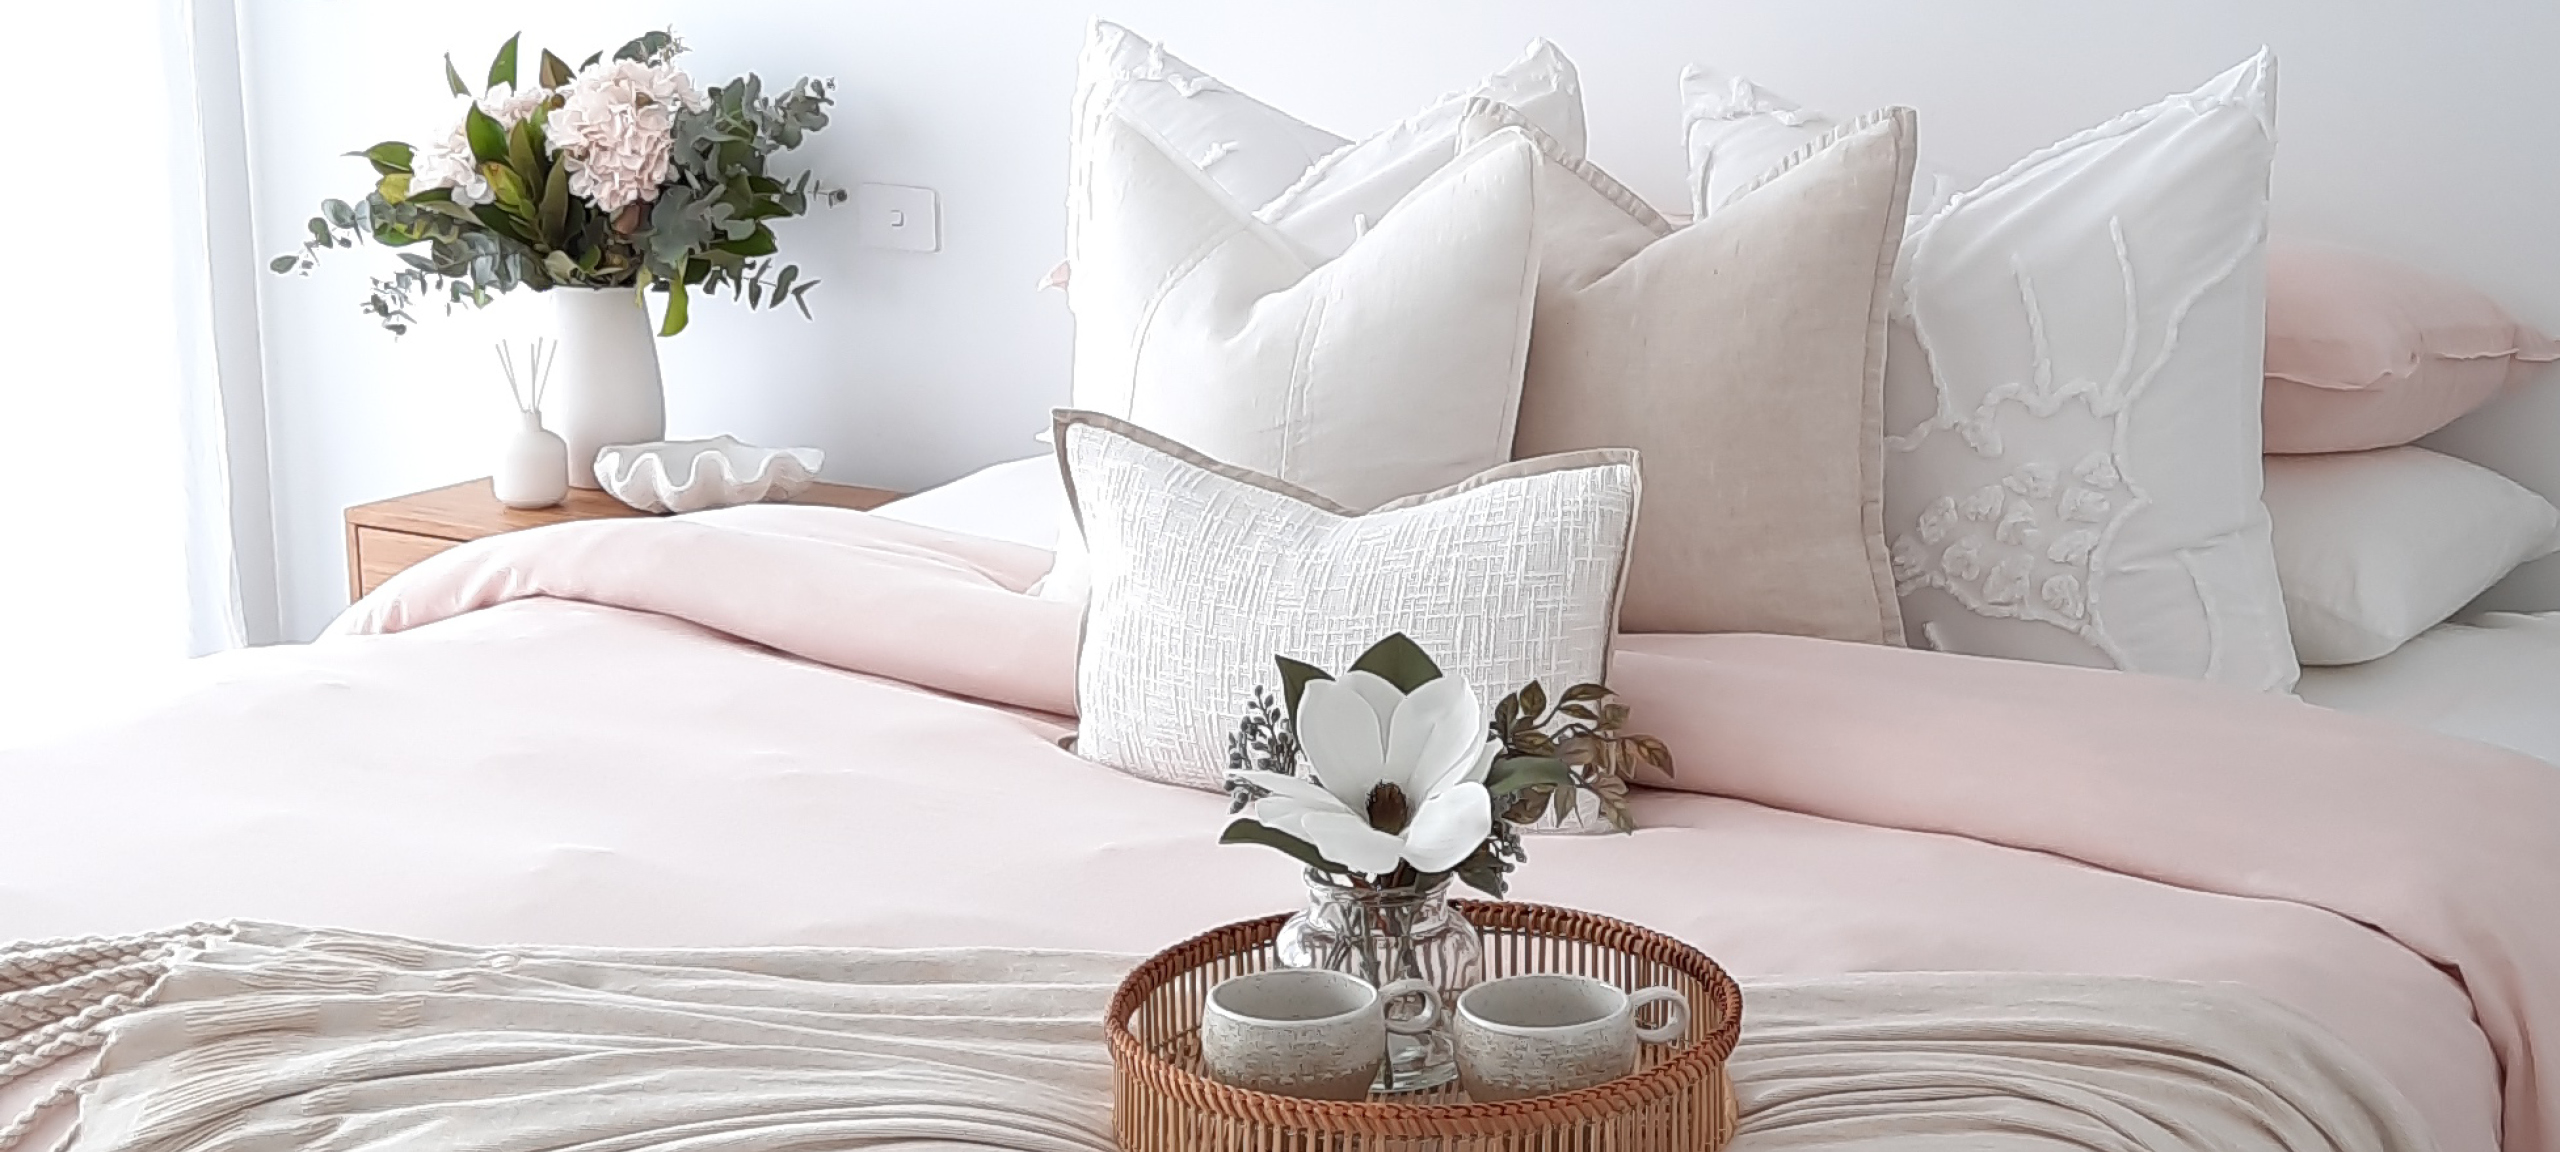 Pillow Talk home styling